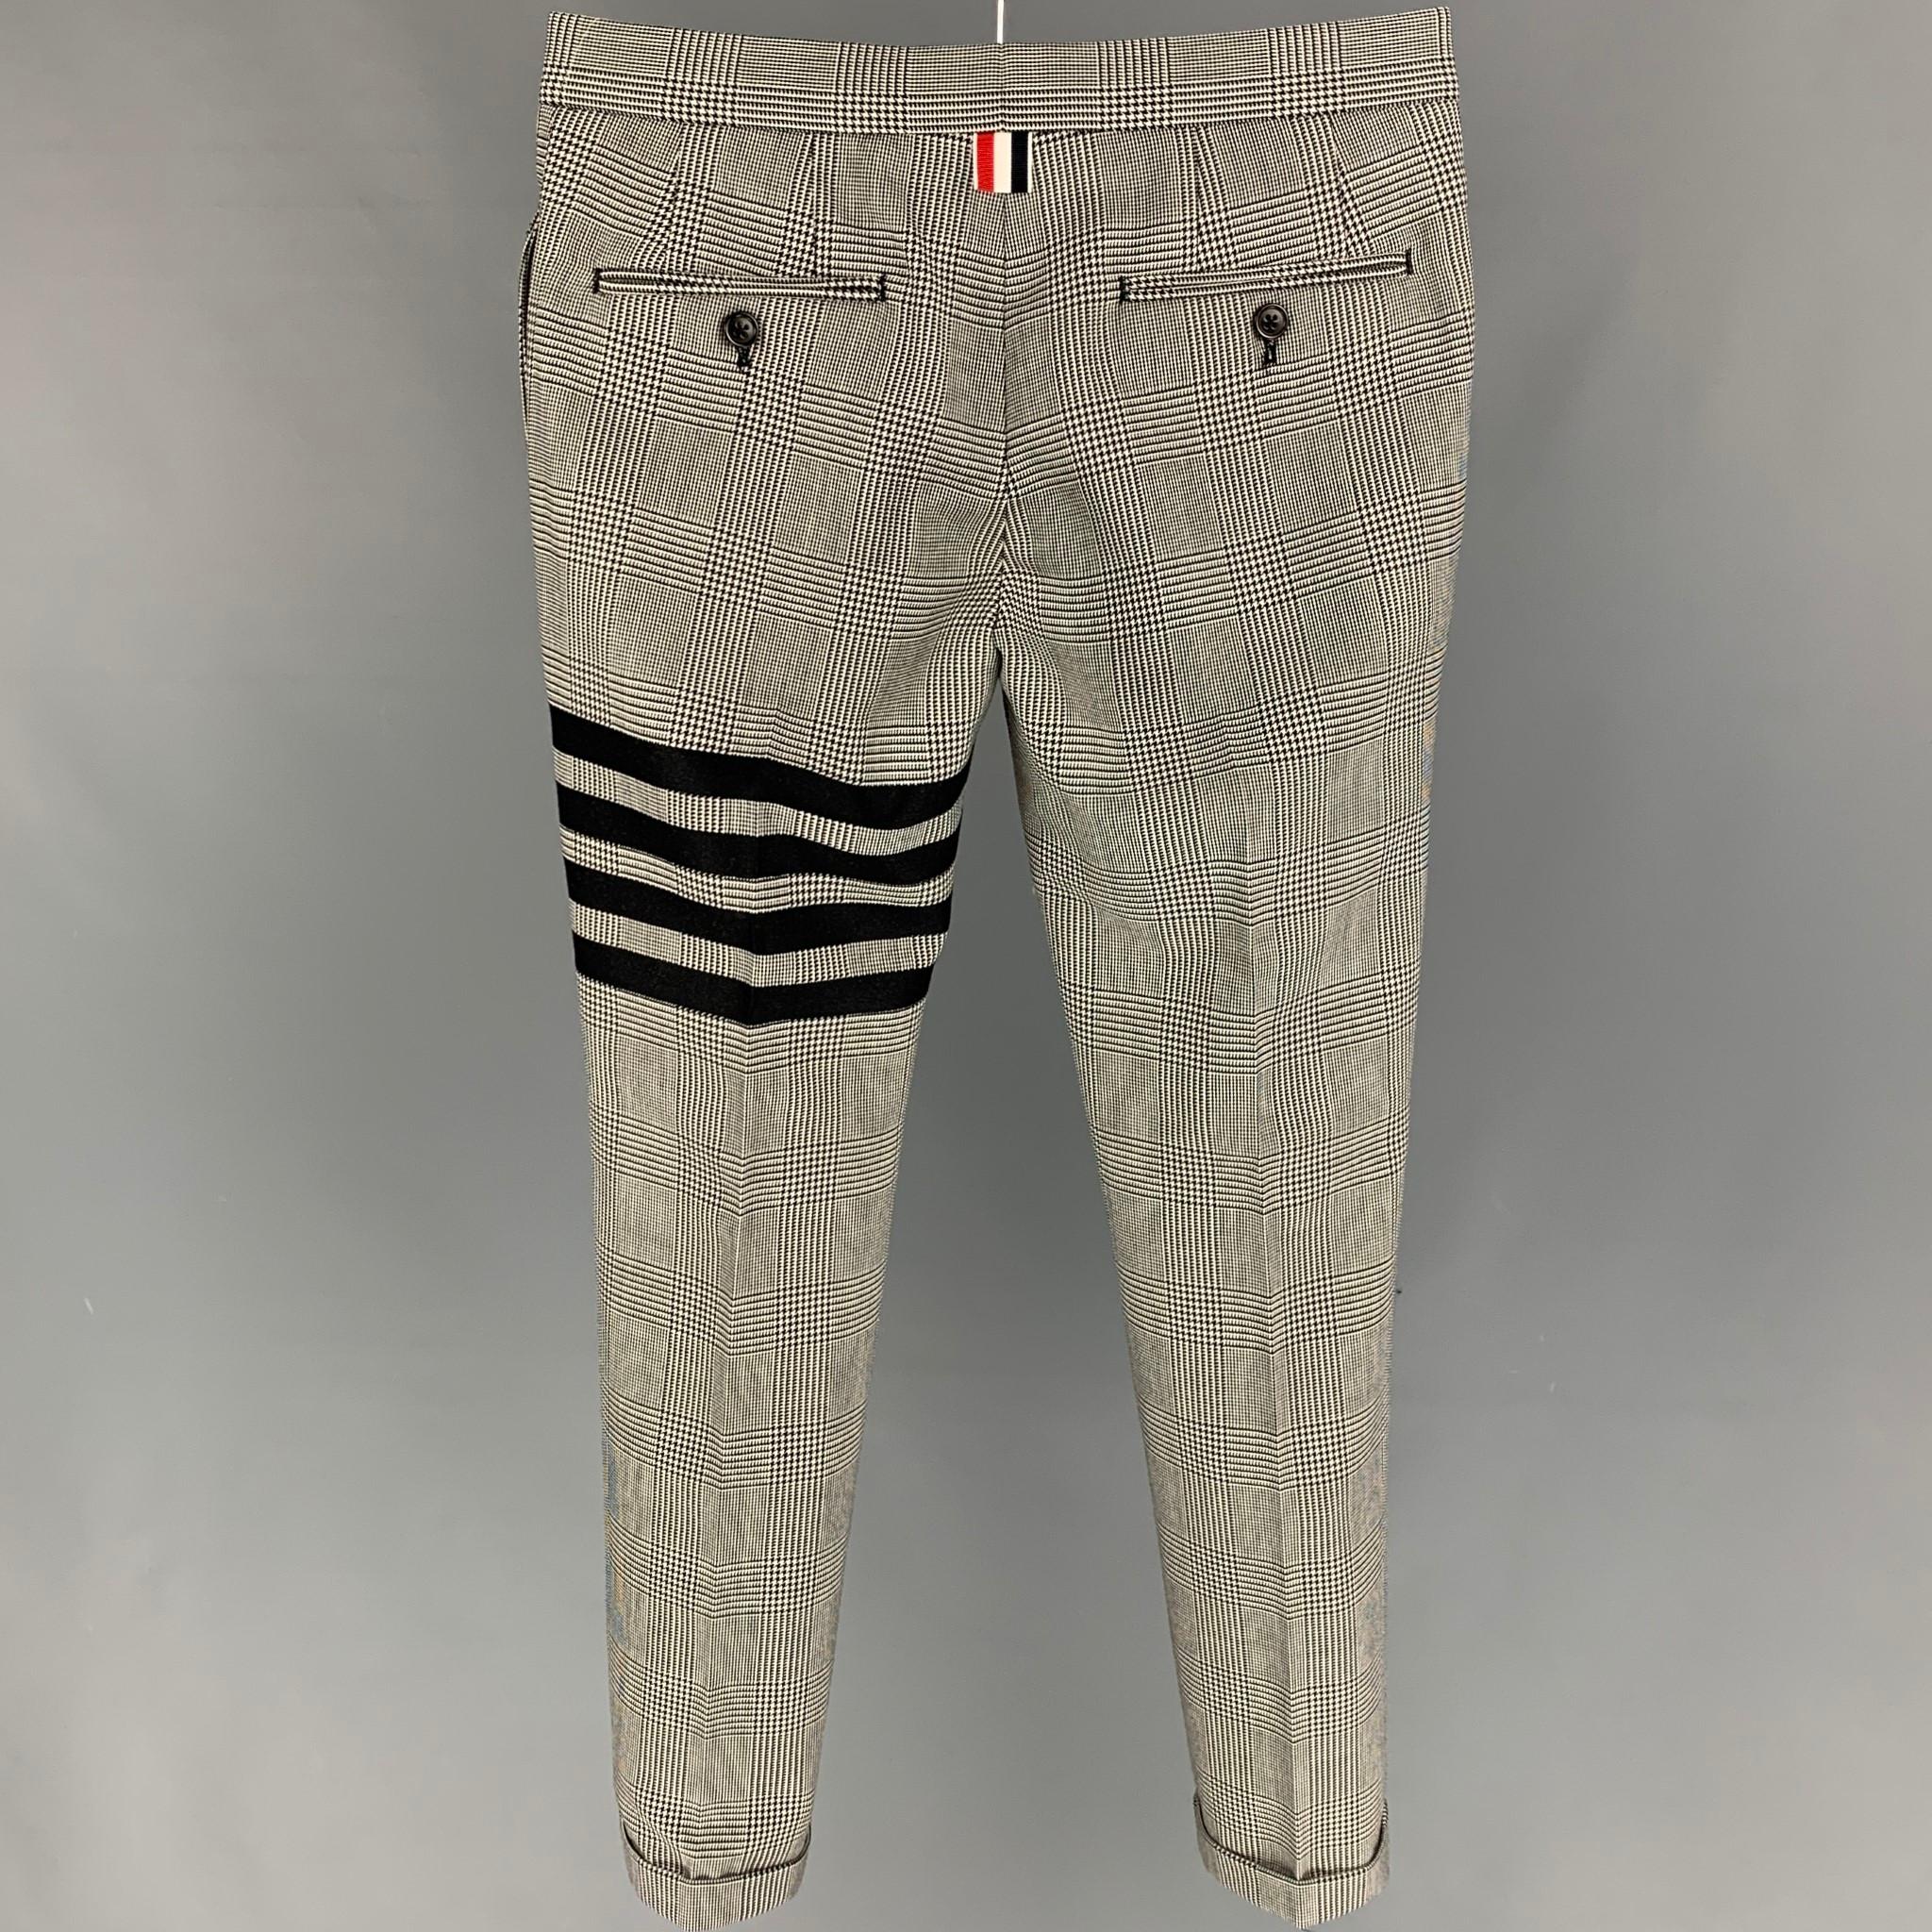 THOM BROWNE dress pants comes in a black & white glen plaid wool featuring a tapered leg, cuffed, stripe trim design, signature stripe details, front tab, and a button fly. Made in Italy. 

Excellent Pre-Owned Condition.
Marked: 36
Original Retail